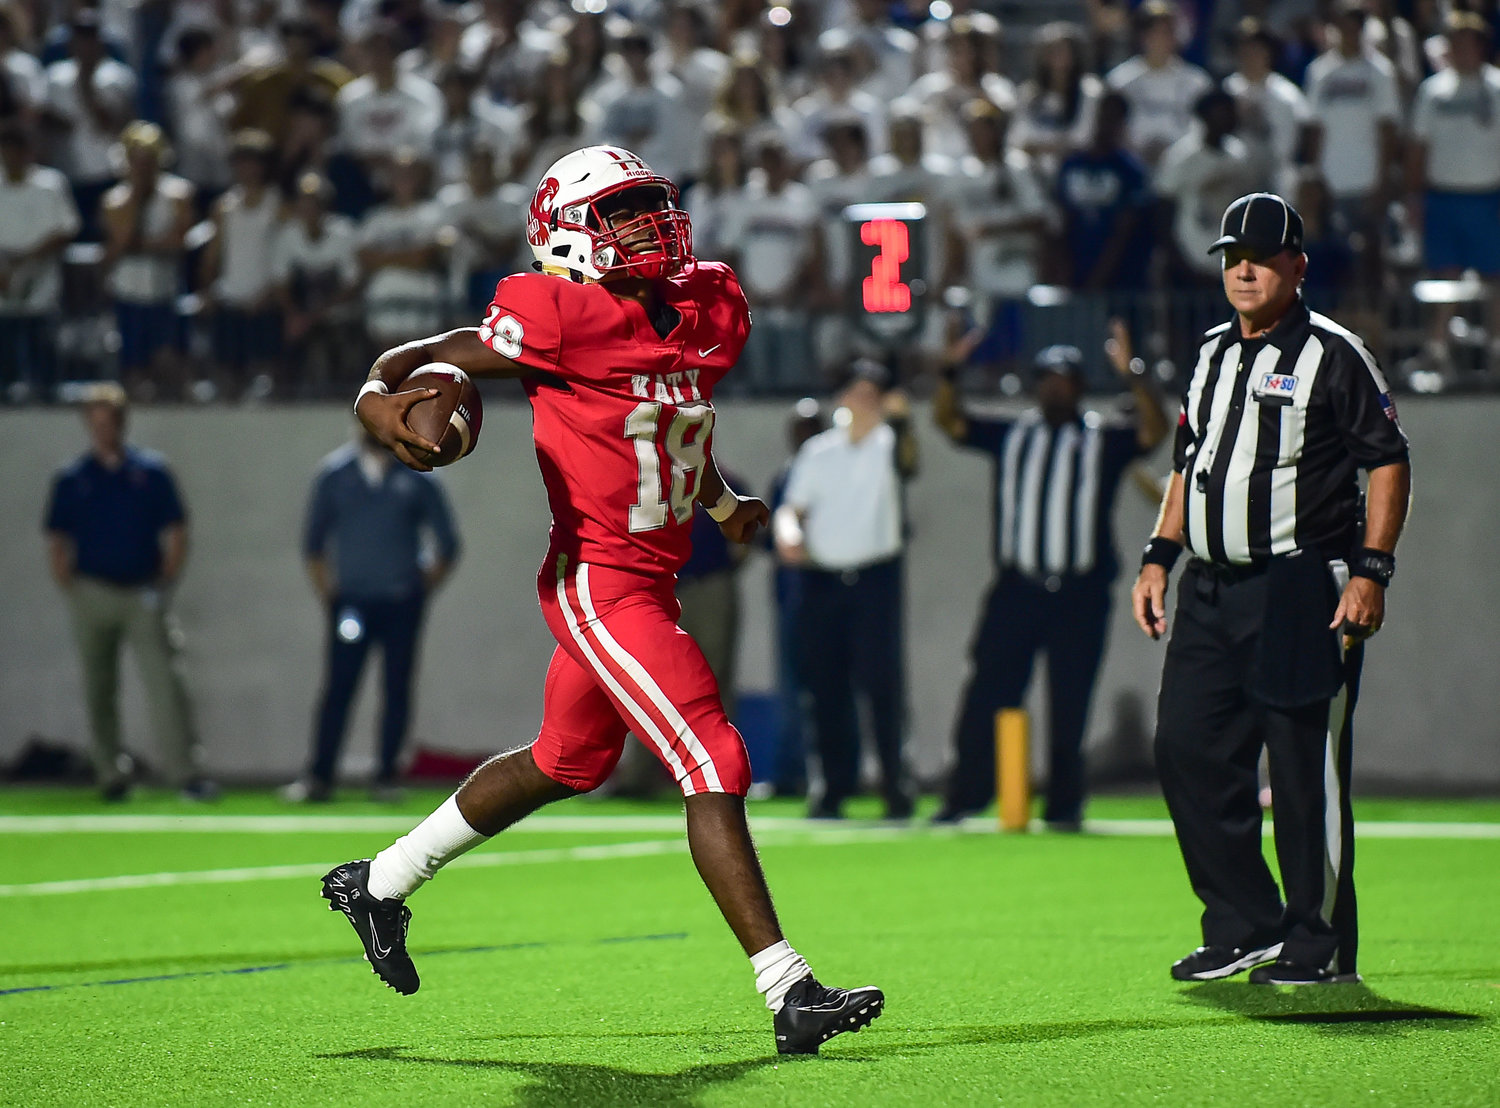 Katy, Tx. Oct. 1, 2021: Katy's #18 Dallas Glass carries the ball scoring a TD during a game between Katy Tigers and Tompkins Falcons at Legacy Stadium in Katy. (Photo by Mark Goodman / Katy Times)